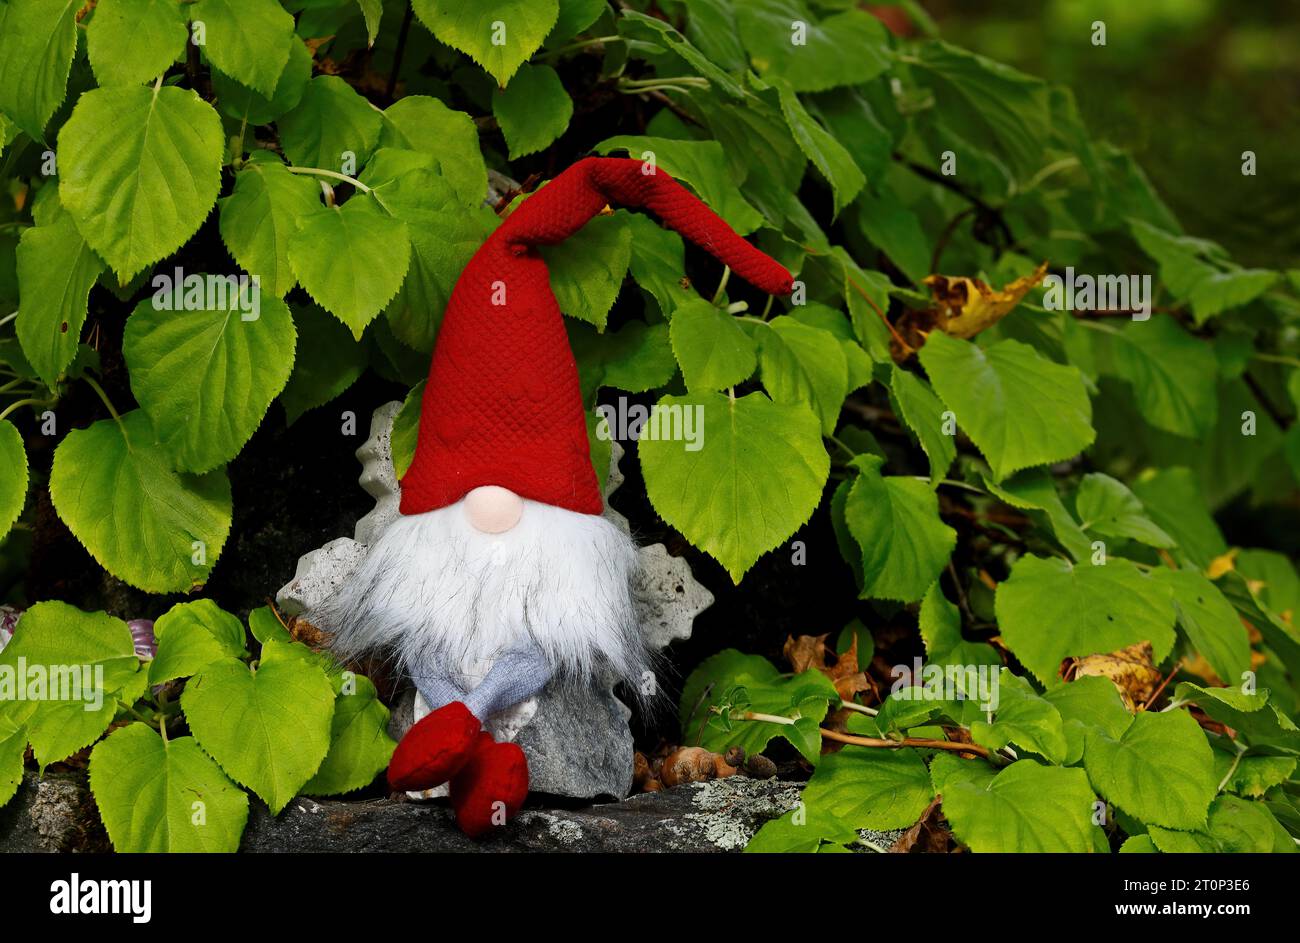 A small gnome sitting on a stone among green leaves in a garden Stock Photo